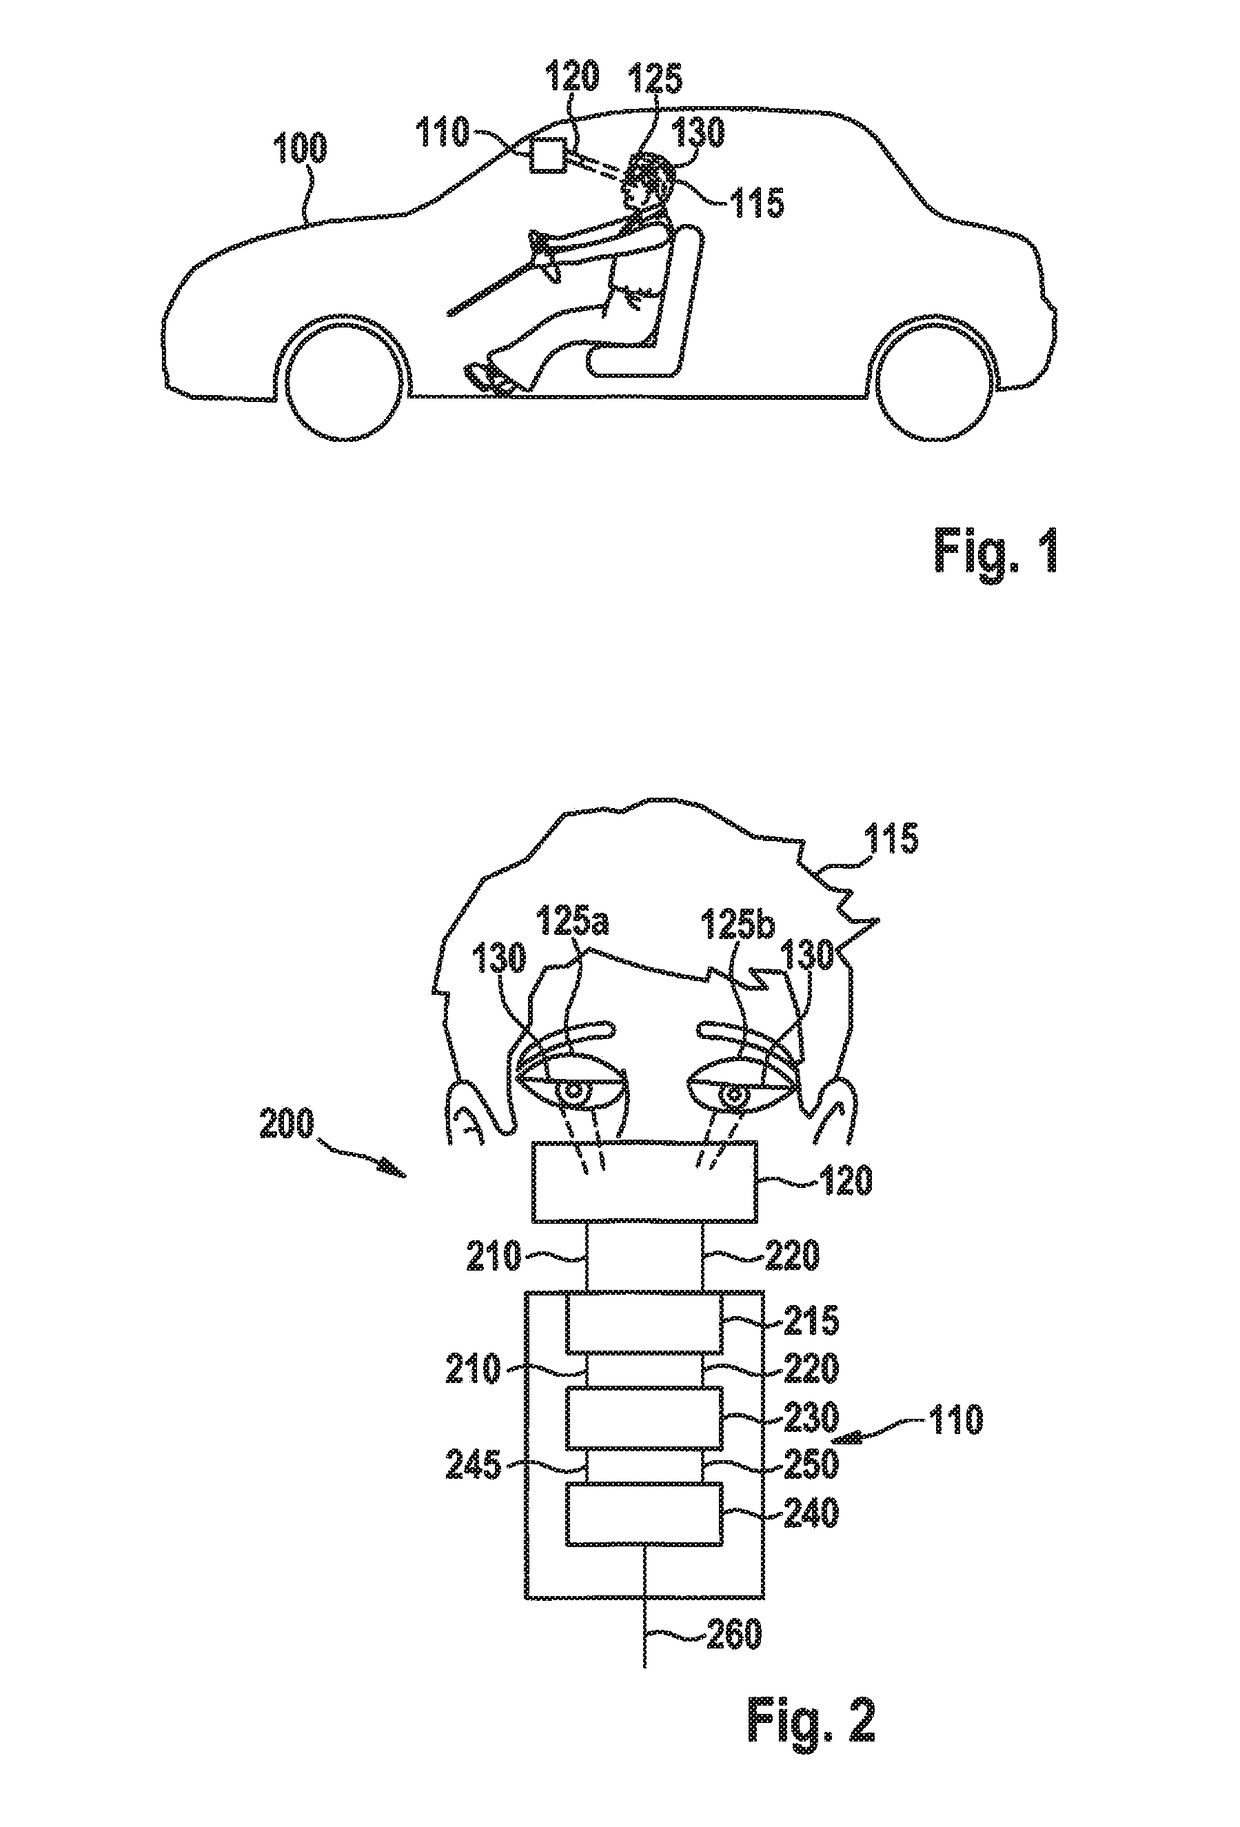 Method and device for detecting a tiredness and/or sleeping state of a driver of a vehicle